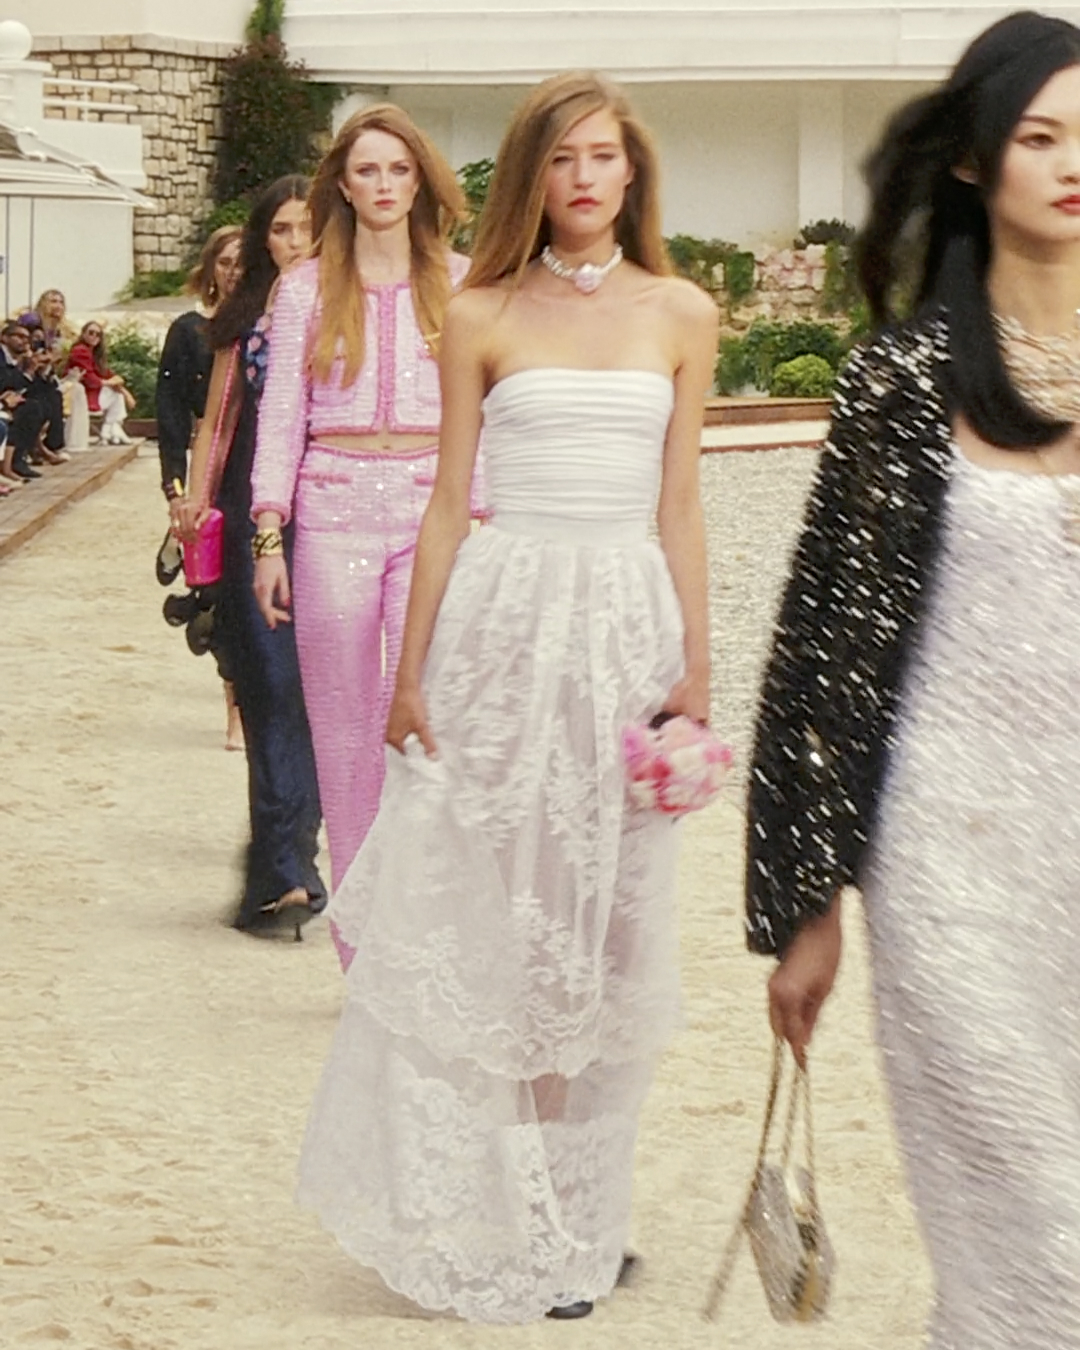 CHANEL Cruise 2022/23 takes over Monte Carlo – The Laterals